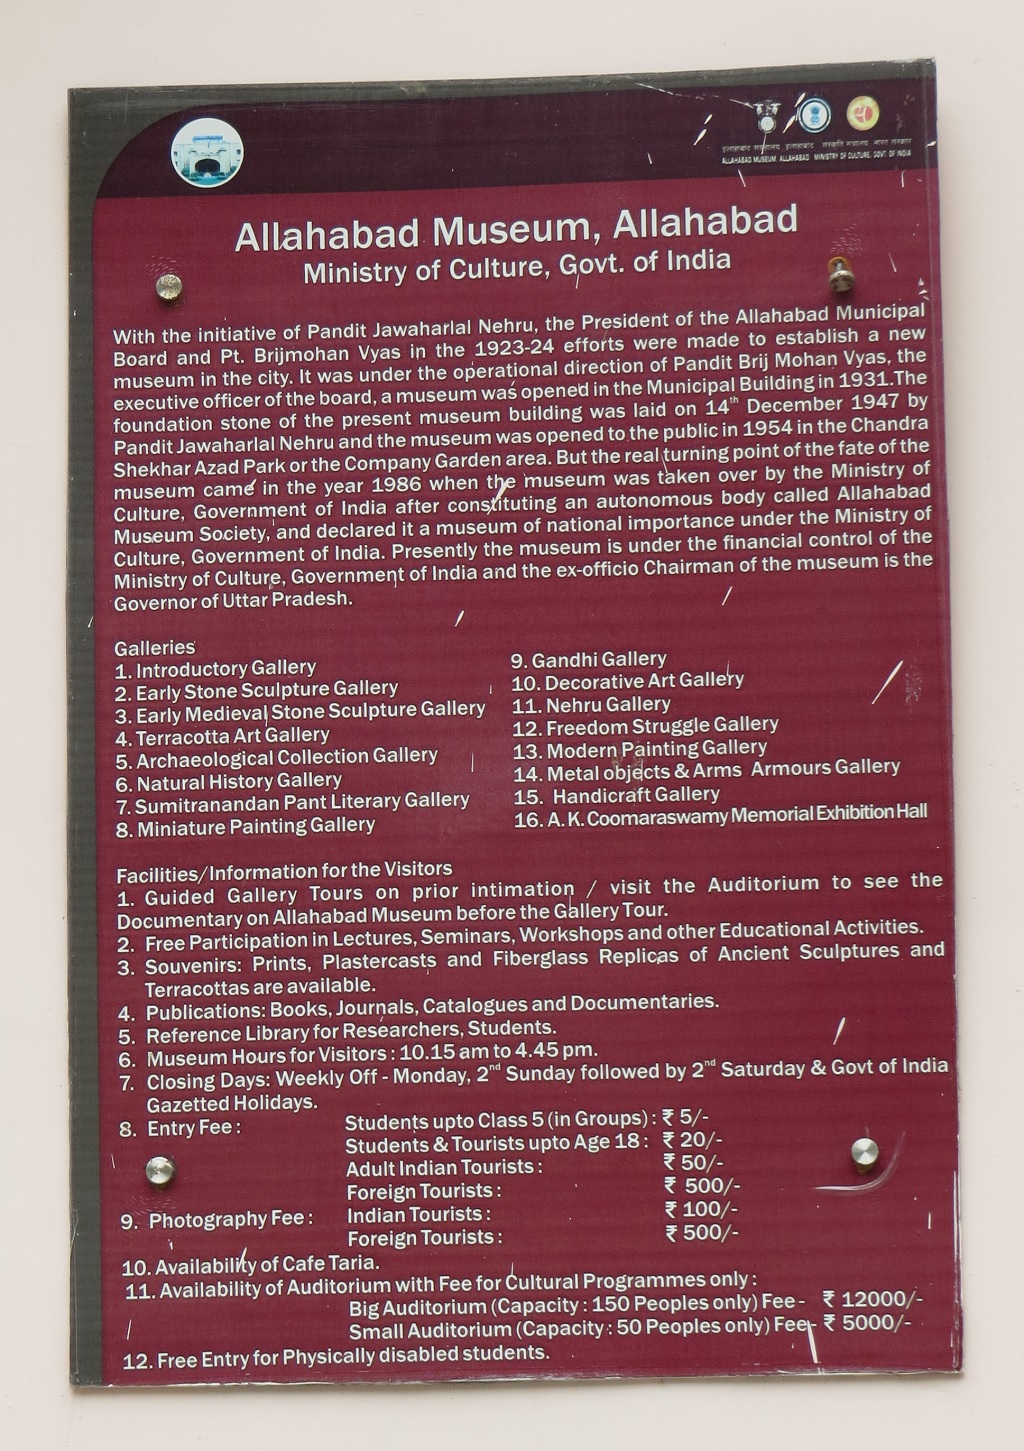 About: Allahabad Museum – Established in 1931